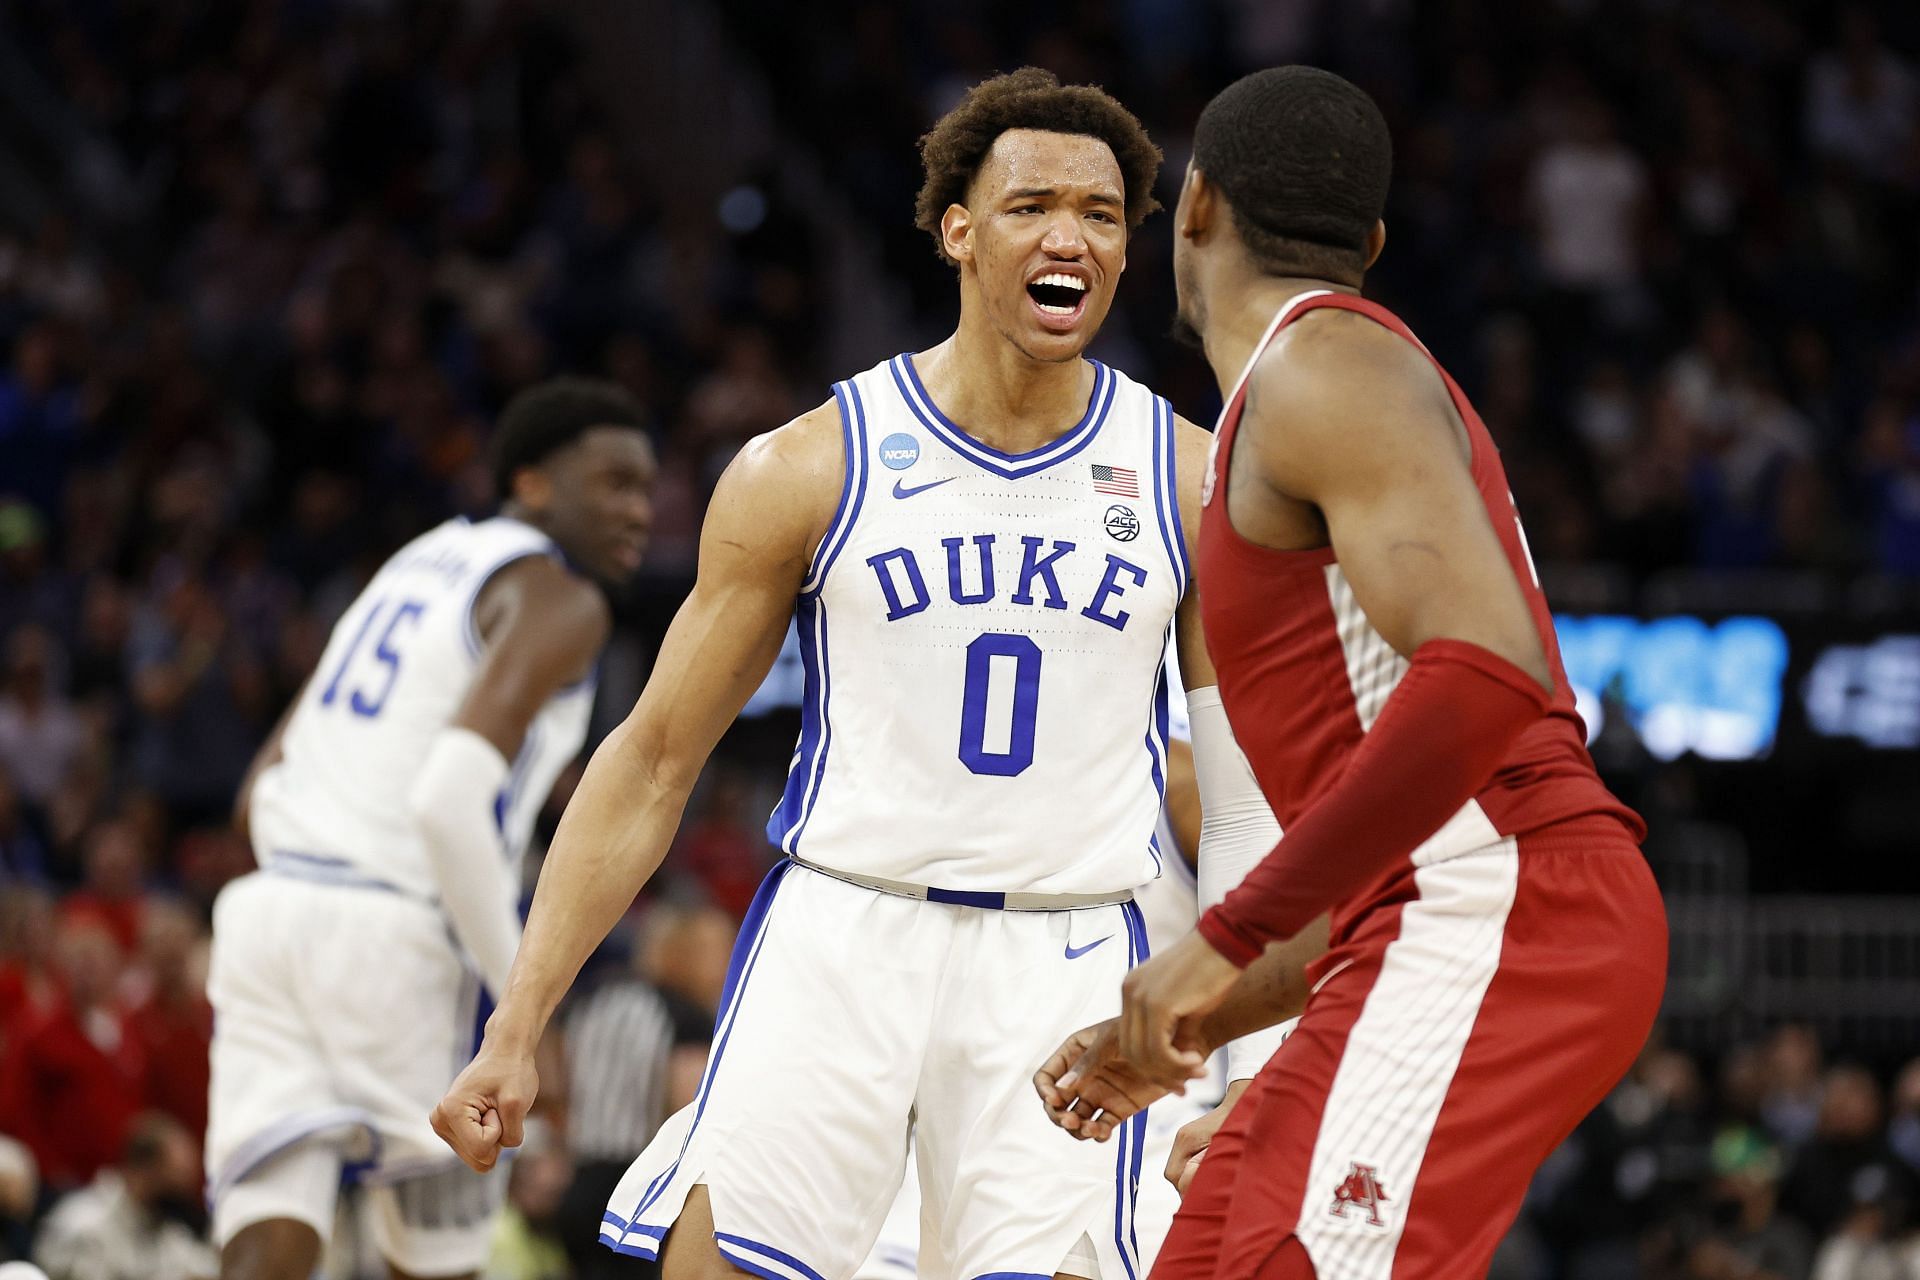 The Duke Blue Devils have been strong in March Madness